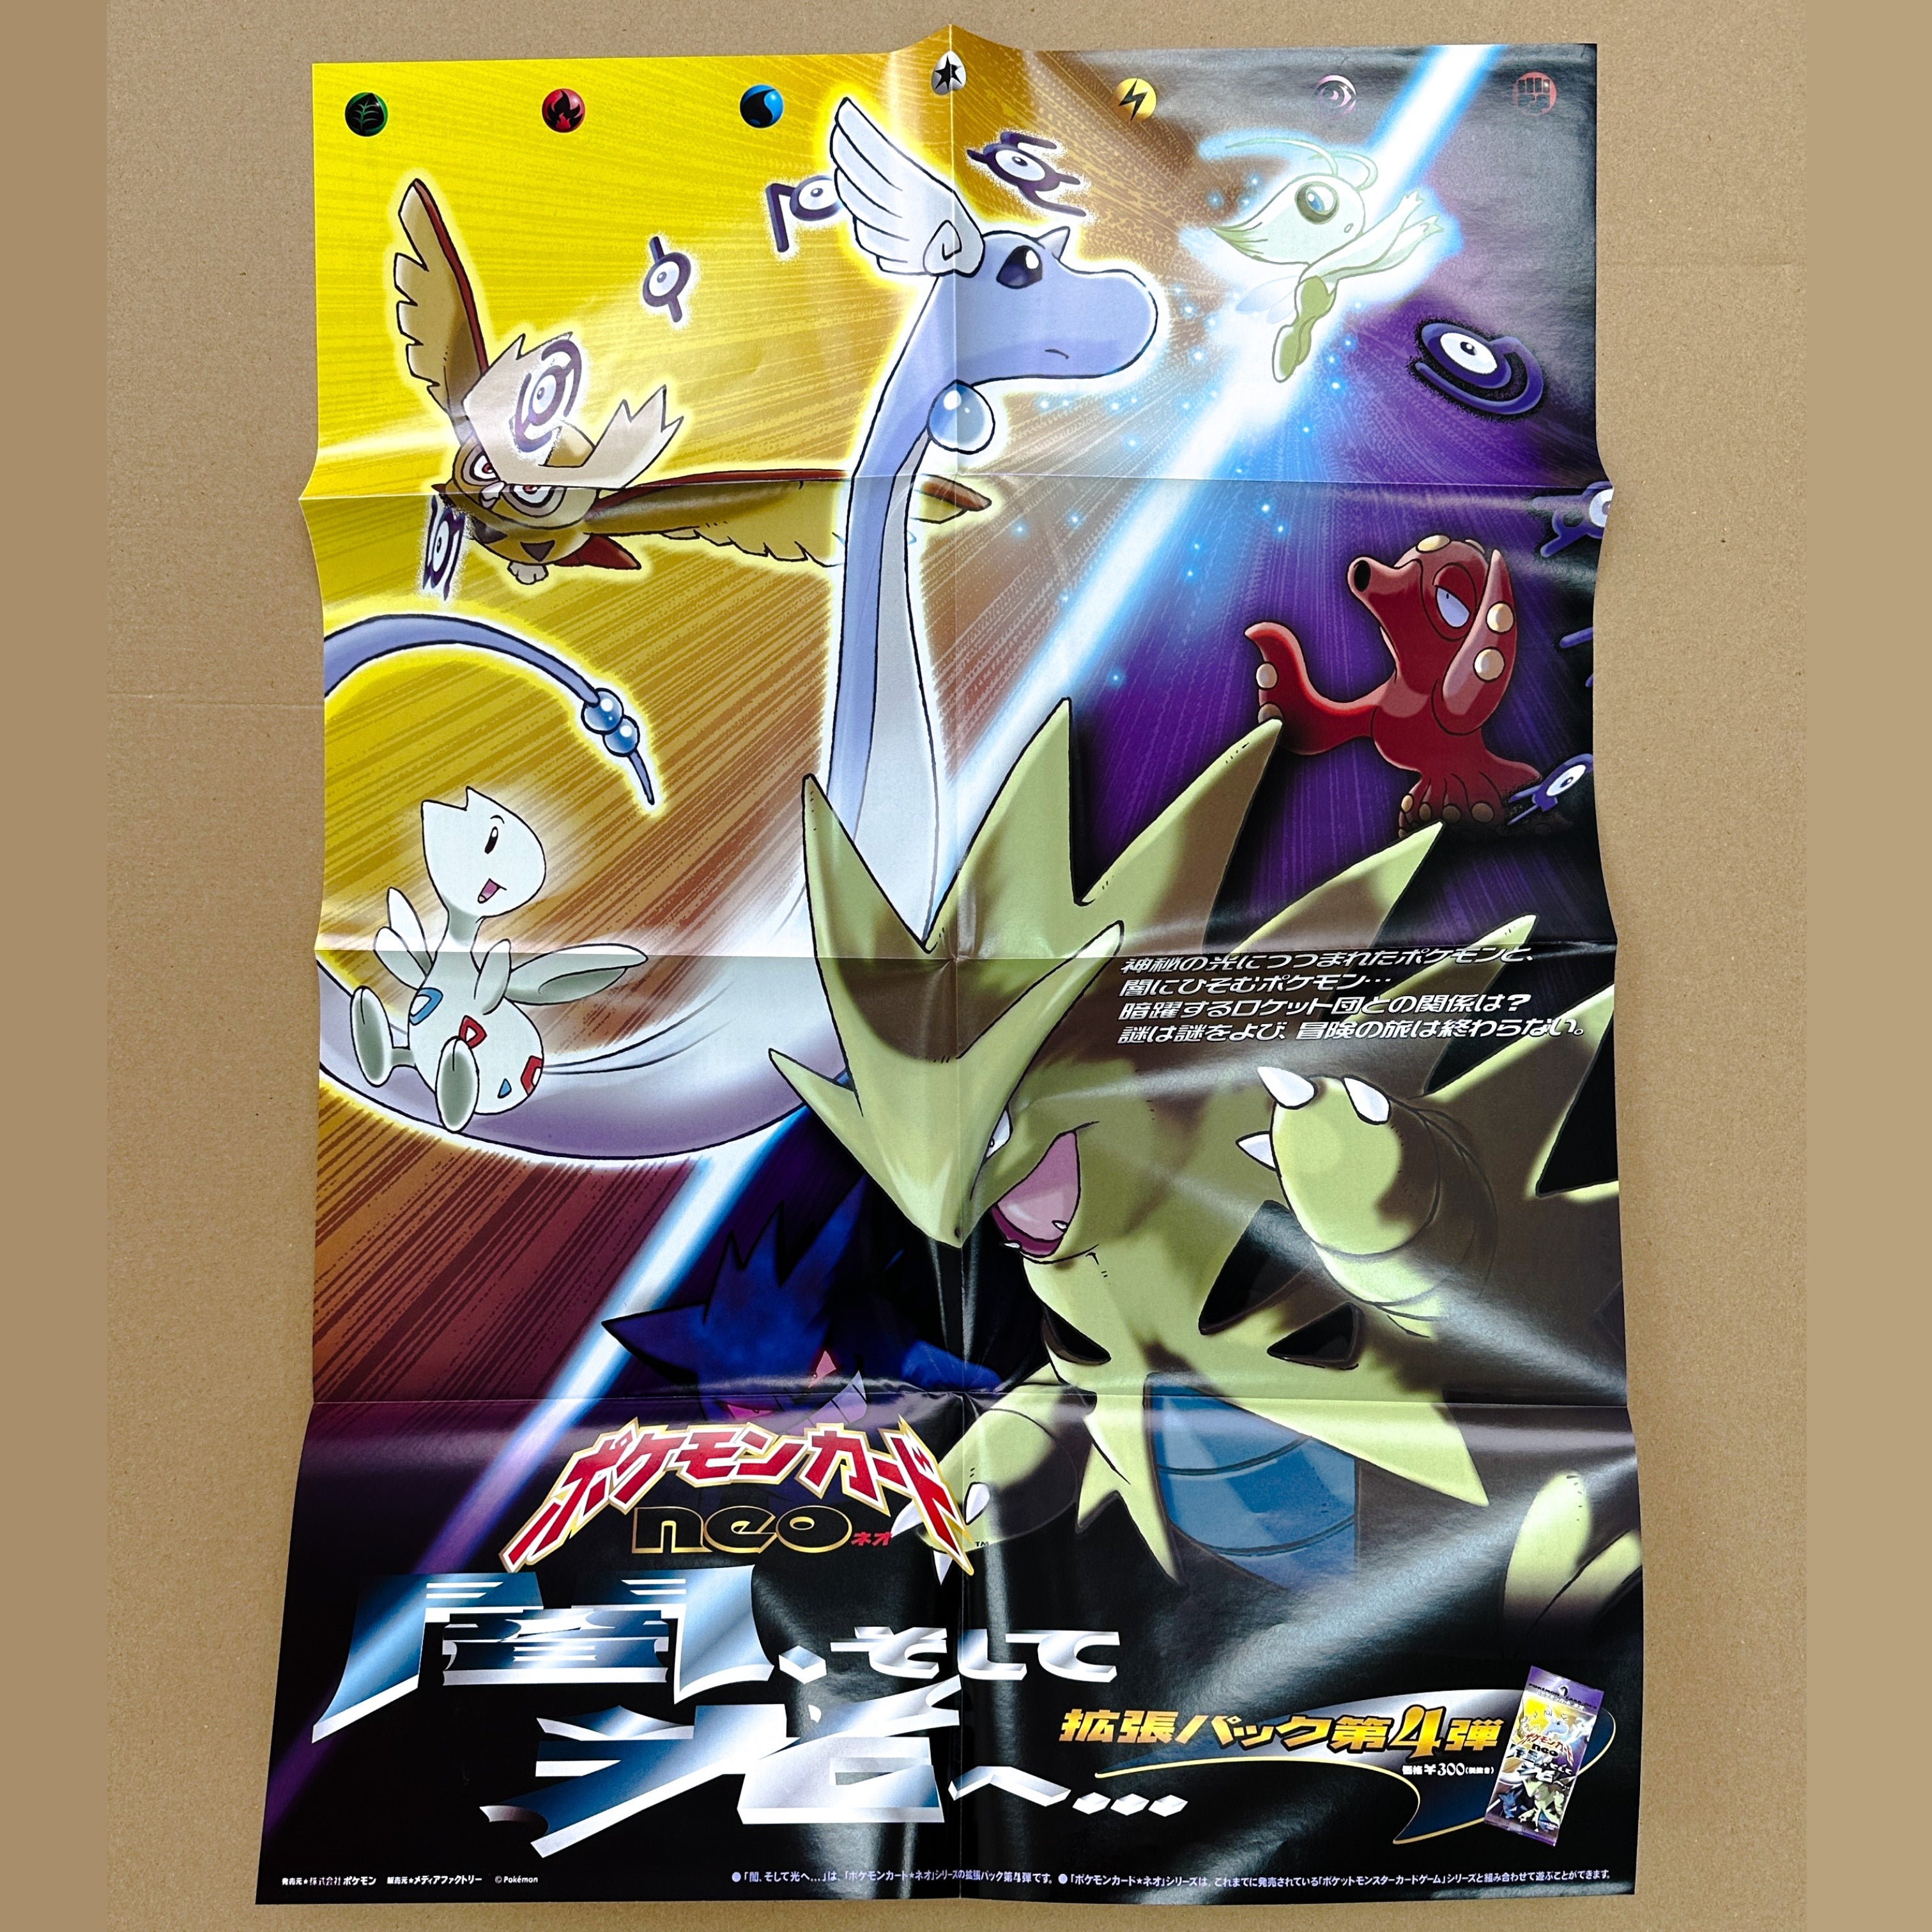 POKEMON POSTER Neo Vol. 4 "From darkness to light..."